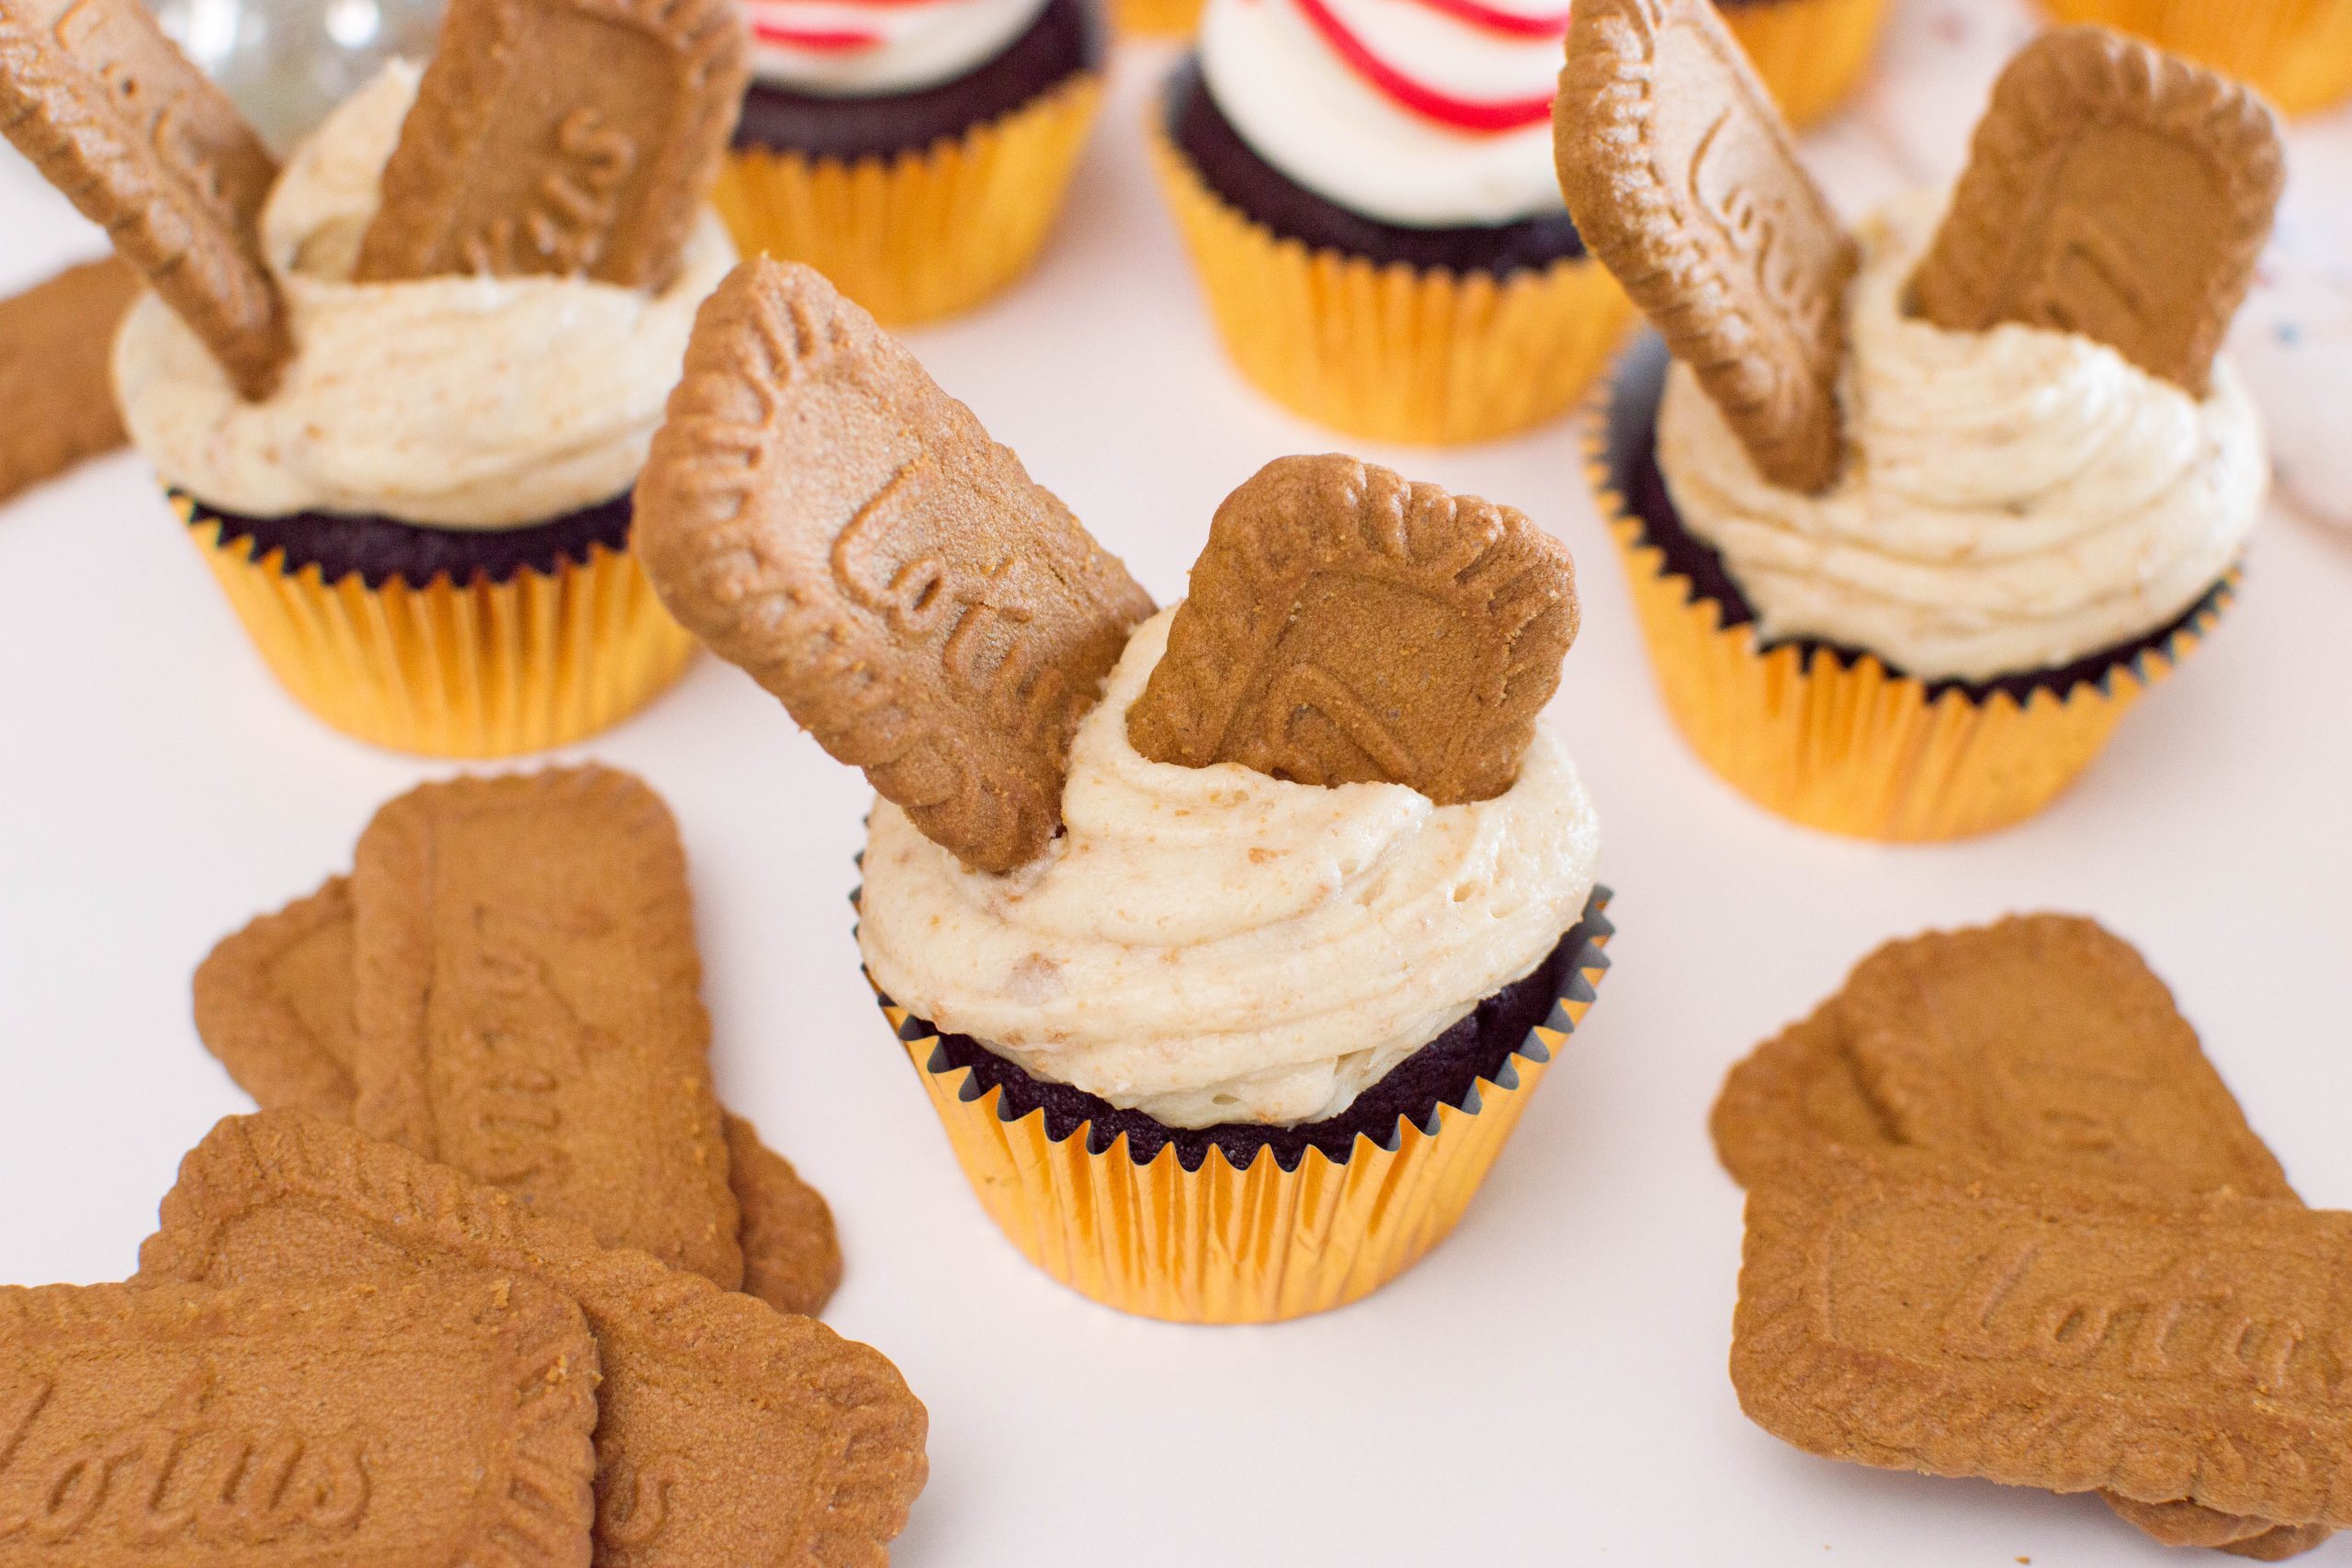 If you’re searching for your next best dessert: look no further! These chocolate cupcakes are topped with the most luscious Biscoff buttercream. They’re an absolute delight, and absolutely perfect for anyone with a sweet tooth.